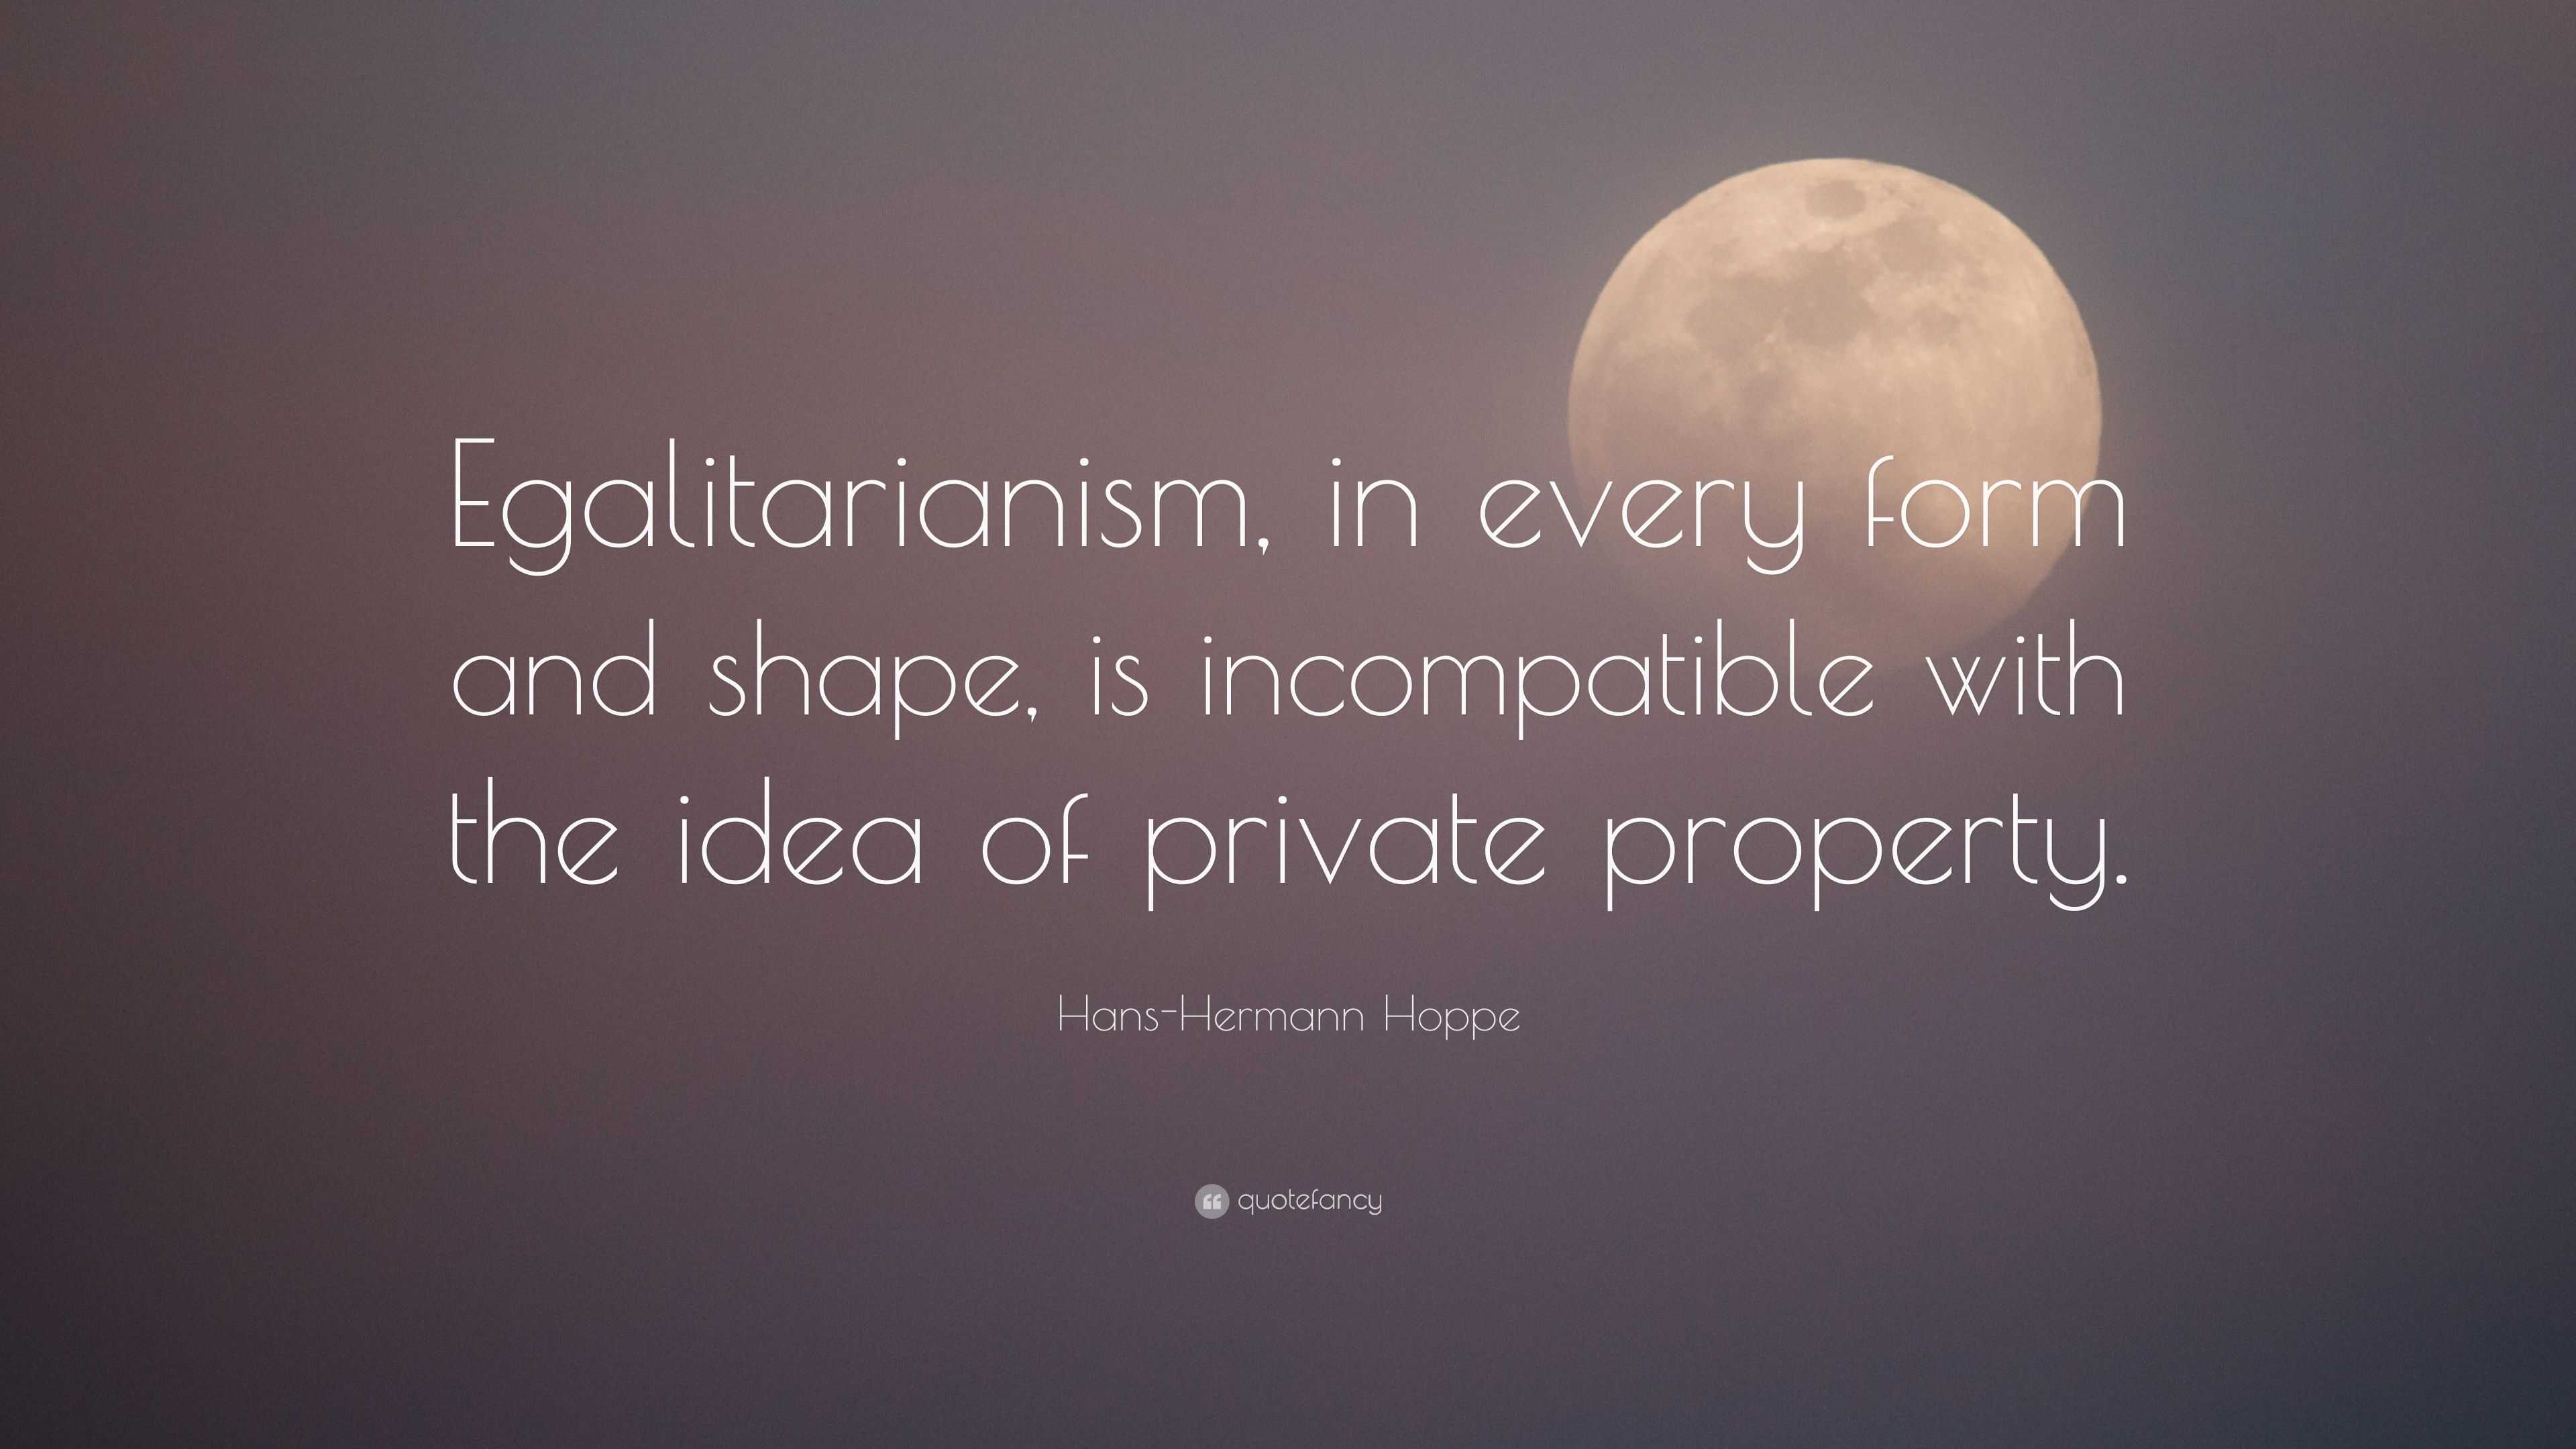 Hans-Hermann Hoppe Quote: “Egalitarianism, in every form and shape, is